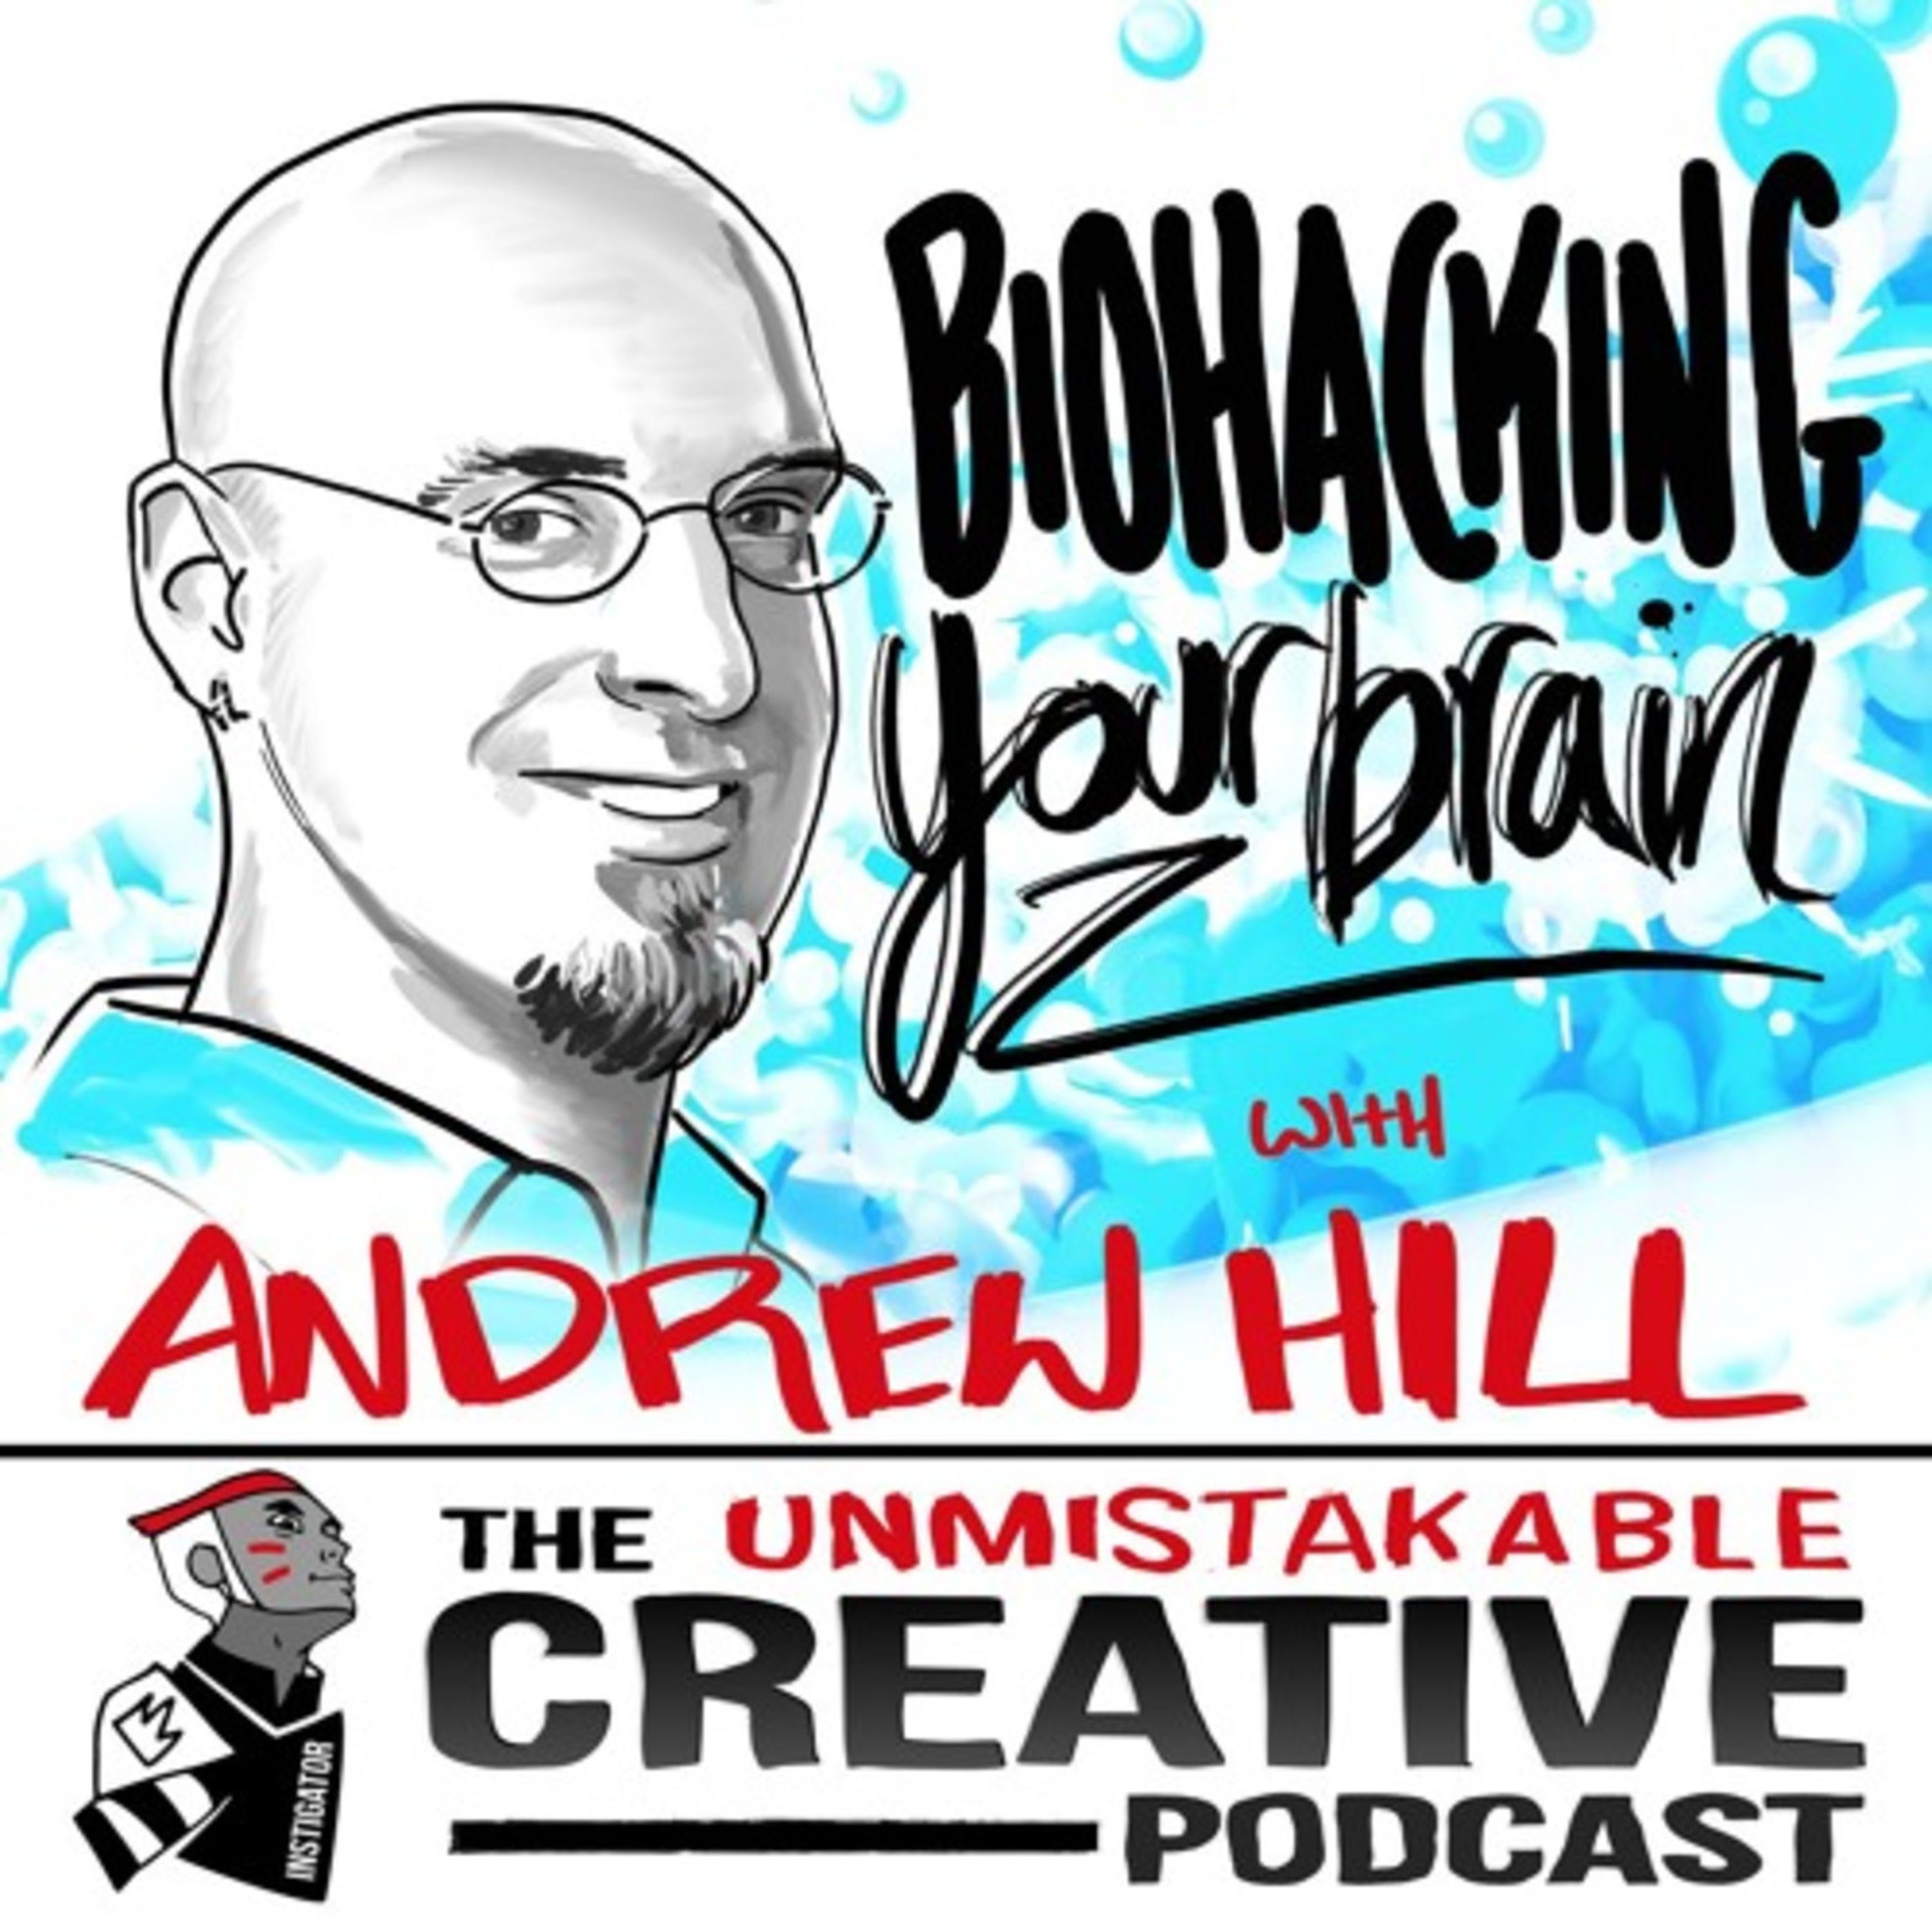 Biohacking Your Brain With Andrew Hill